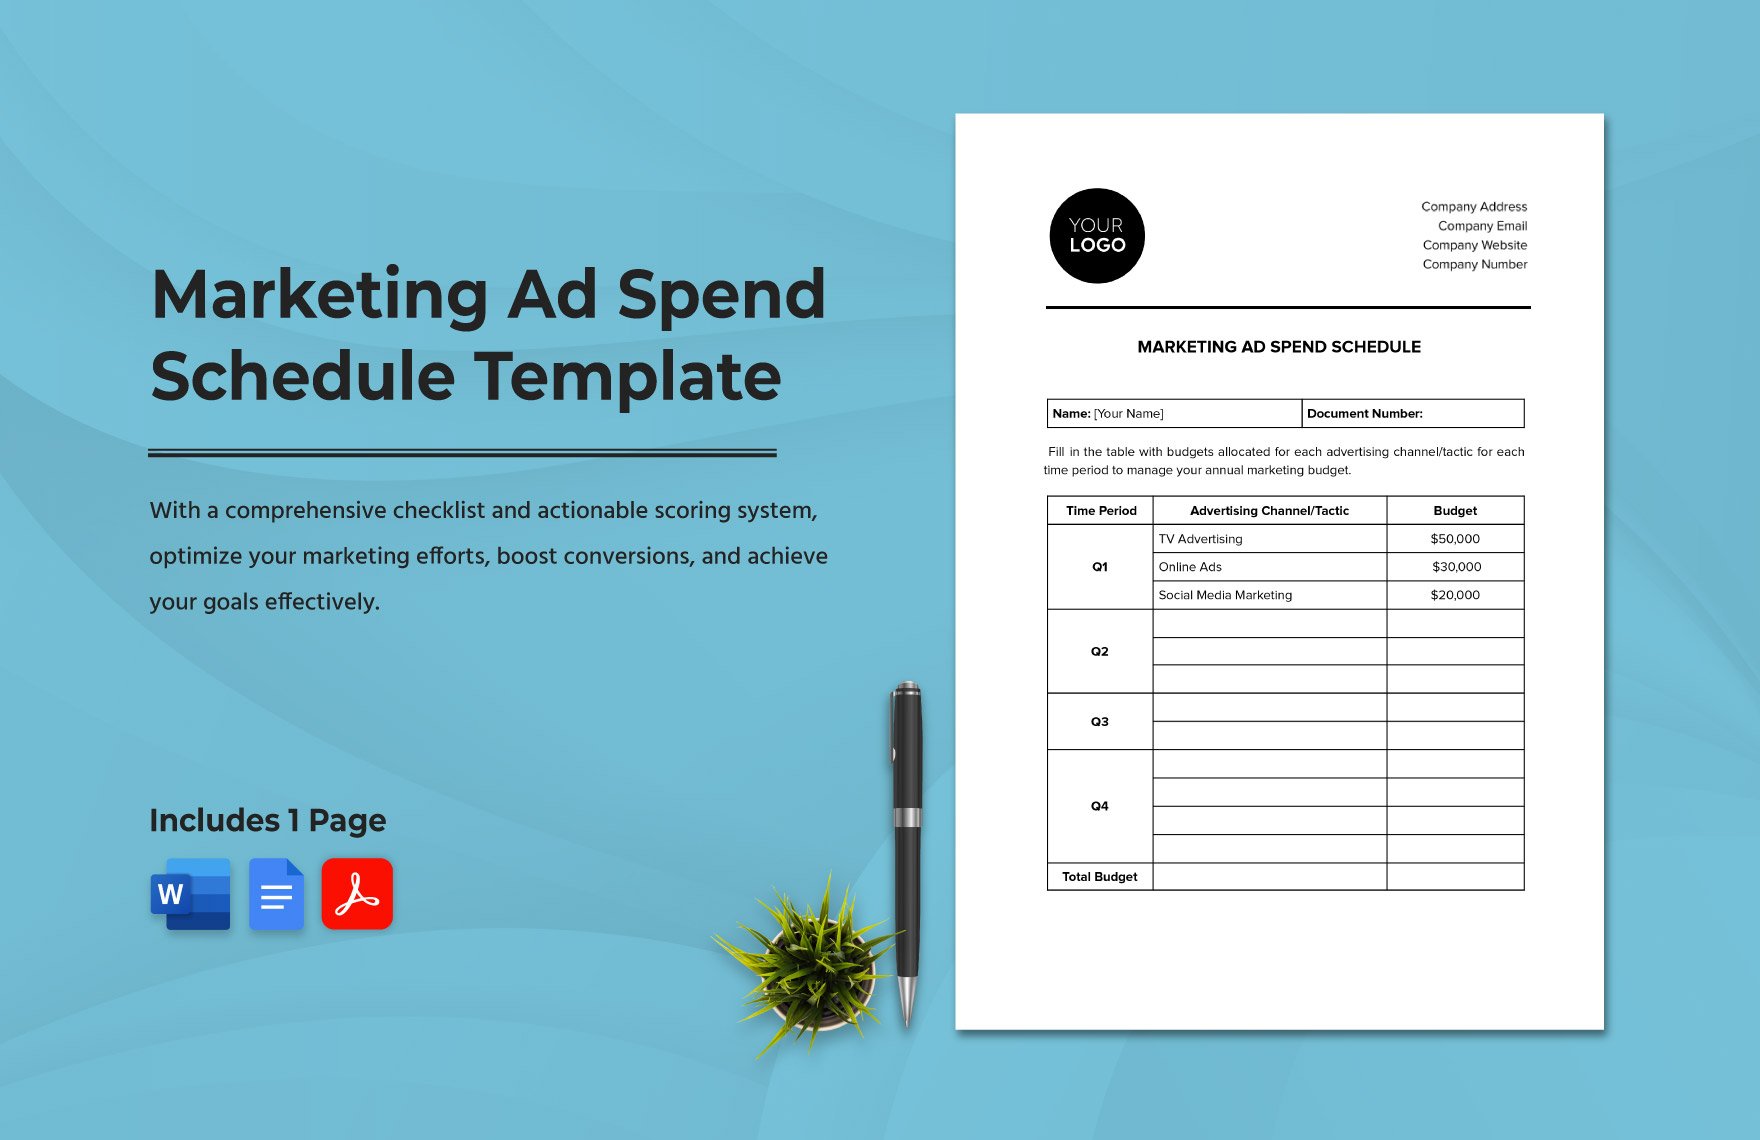 Marketing Ad Spend Schedule Template in Word, Google Docs, PDF